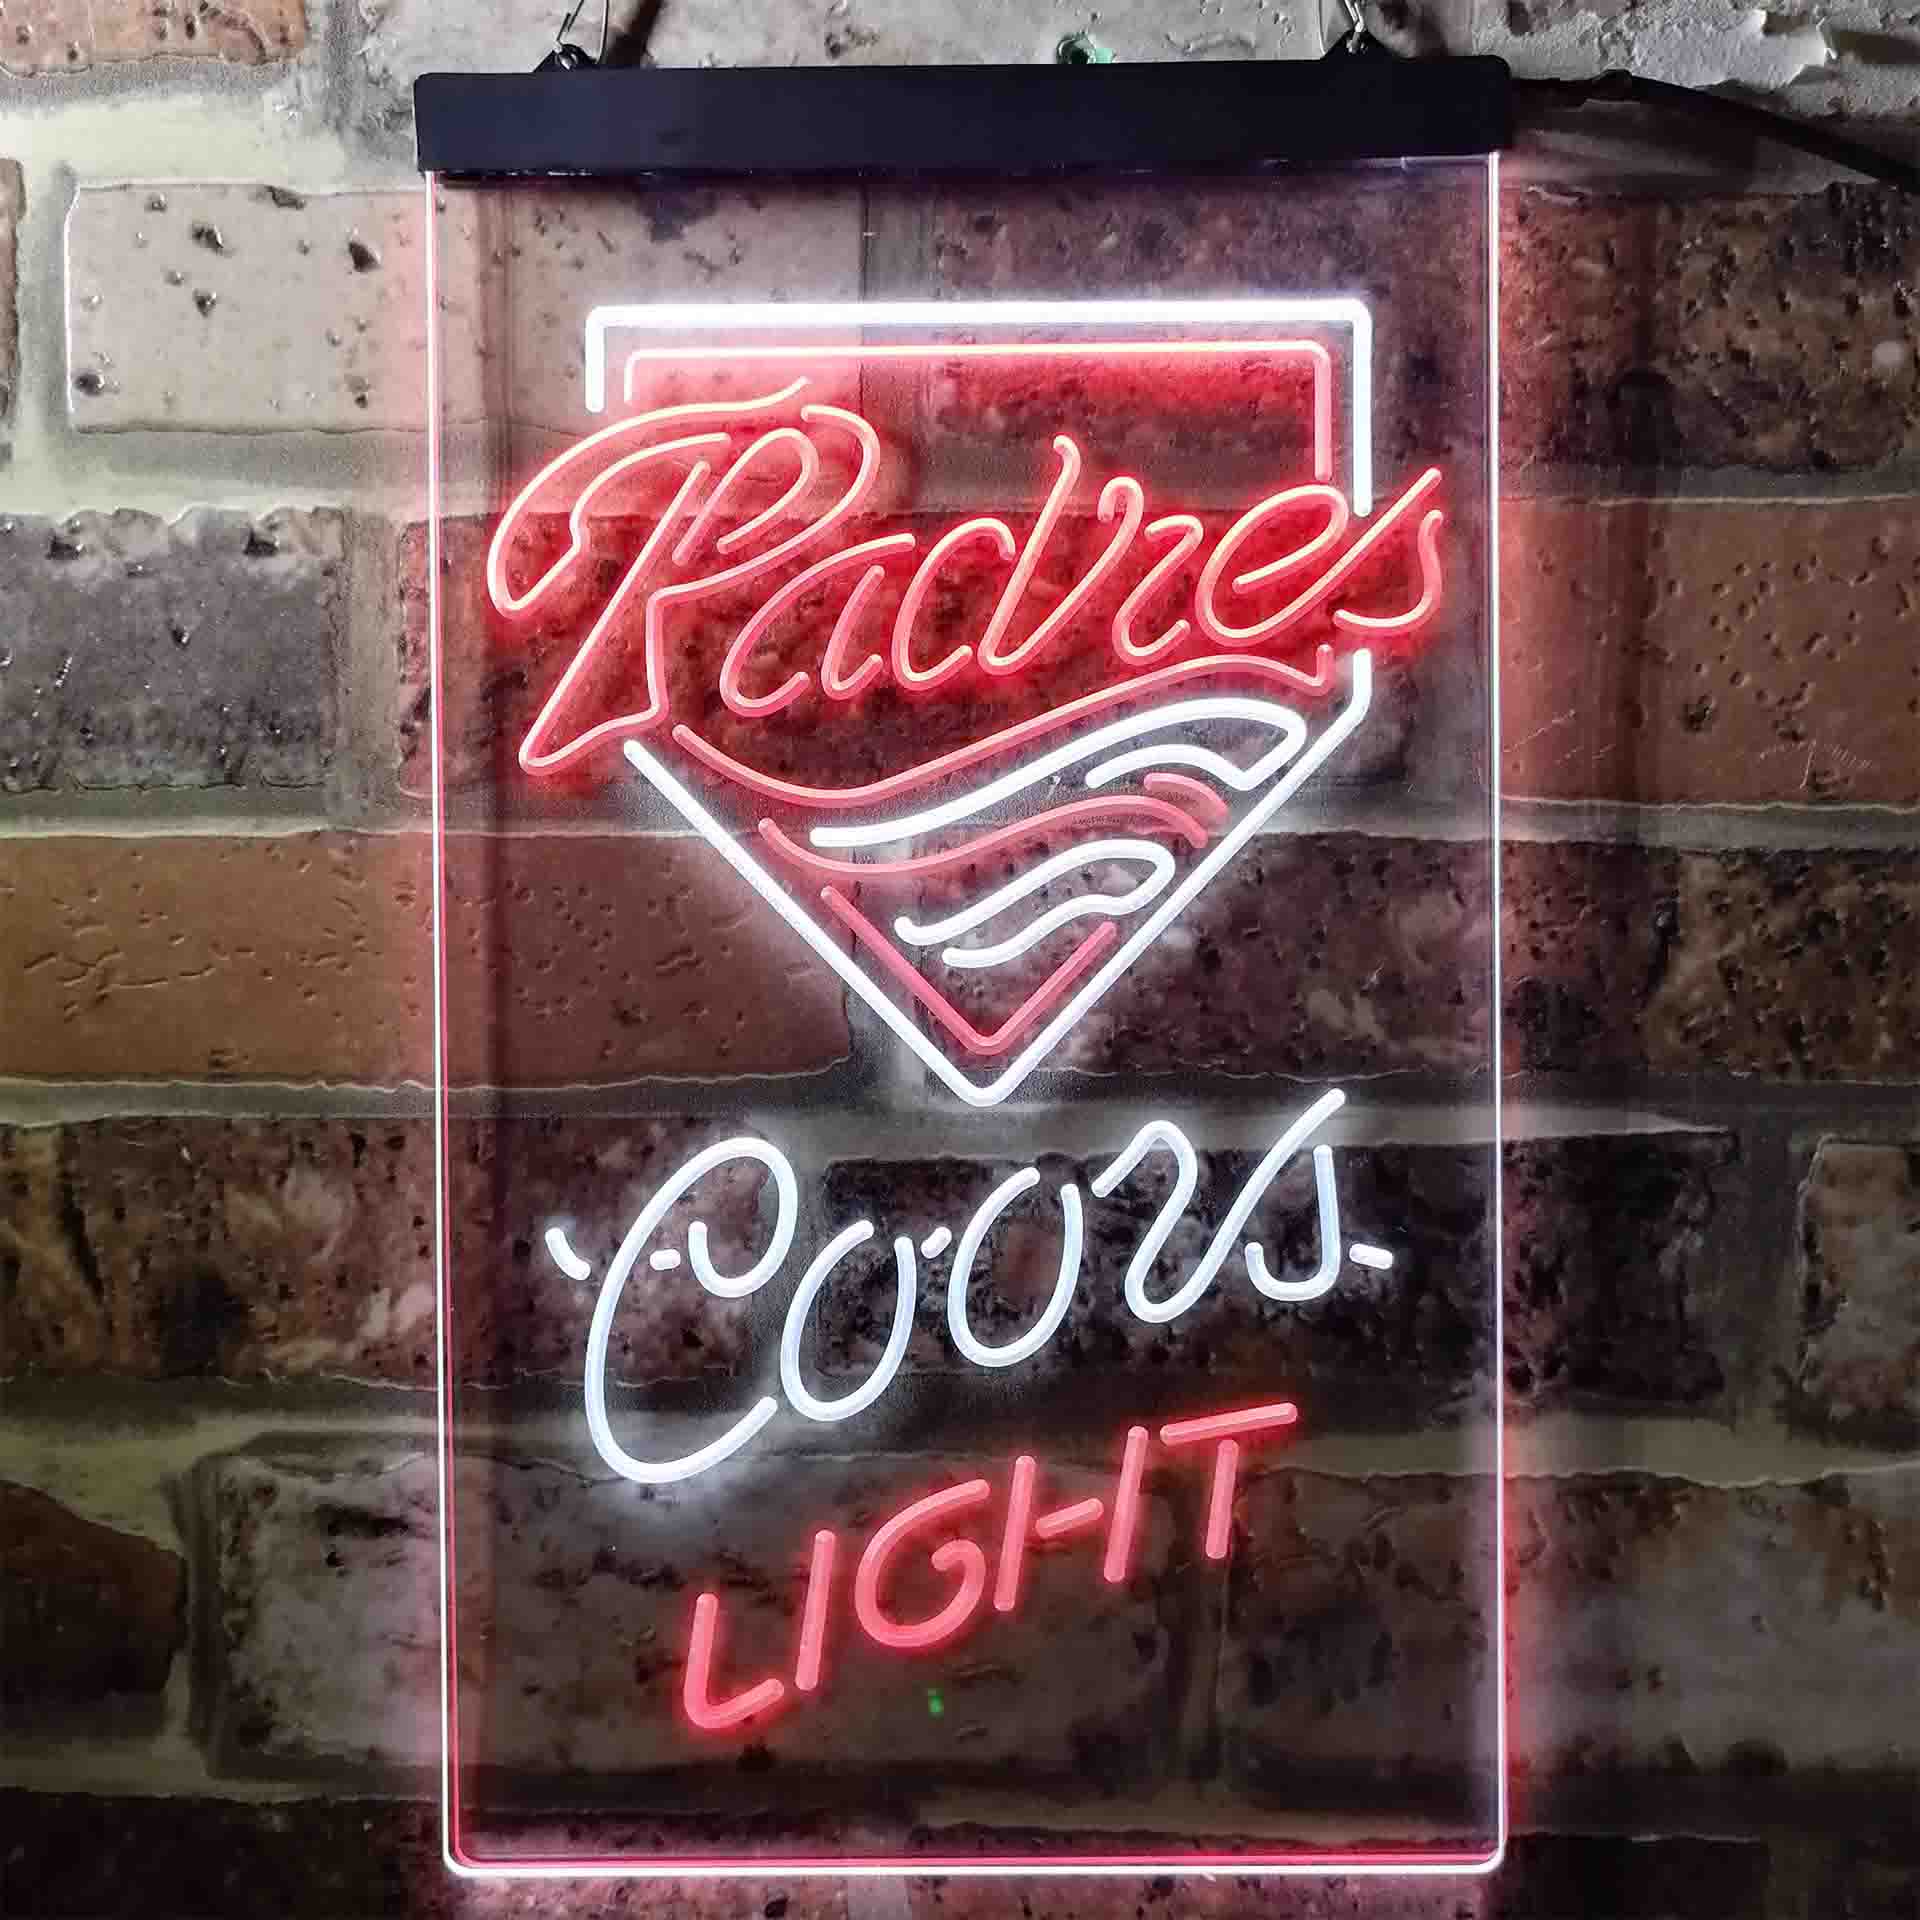 San Diego Padres Coors Light Neon-Like LED Sign